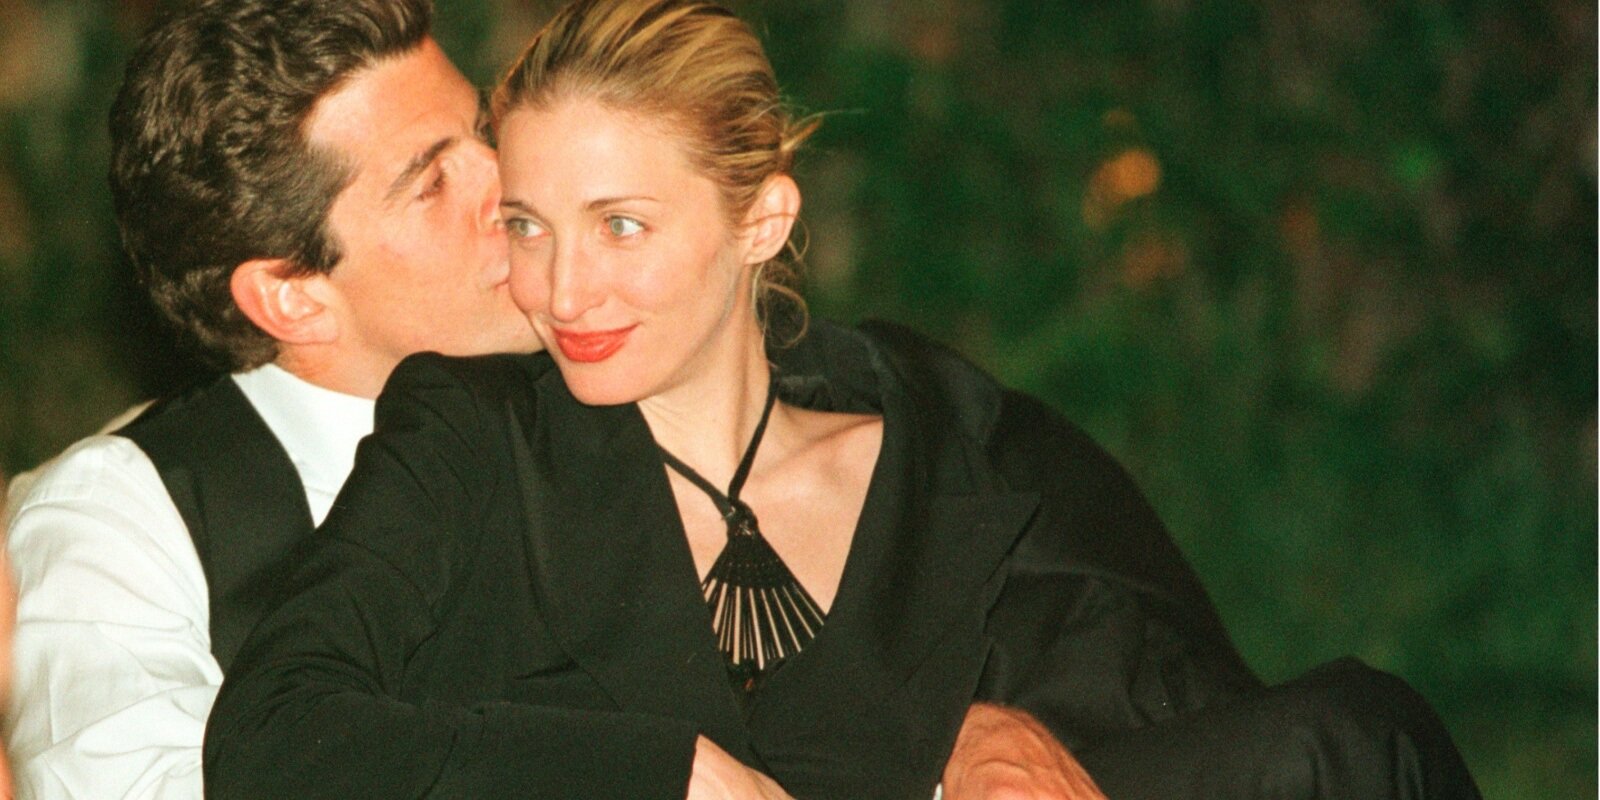 John F. Kennedy Jr. and his wife Carolyn Bessette Kennedy at the White House Correspondent's Dinner in 1999.